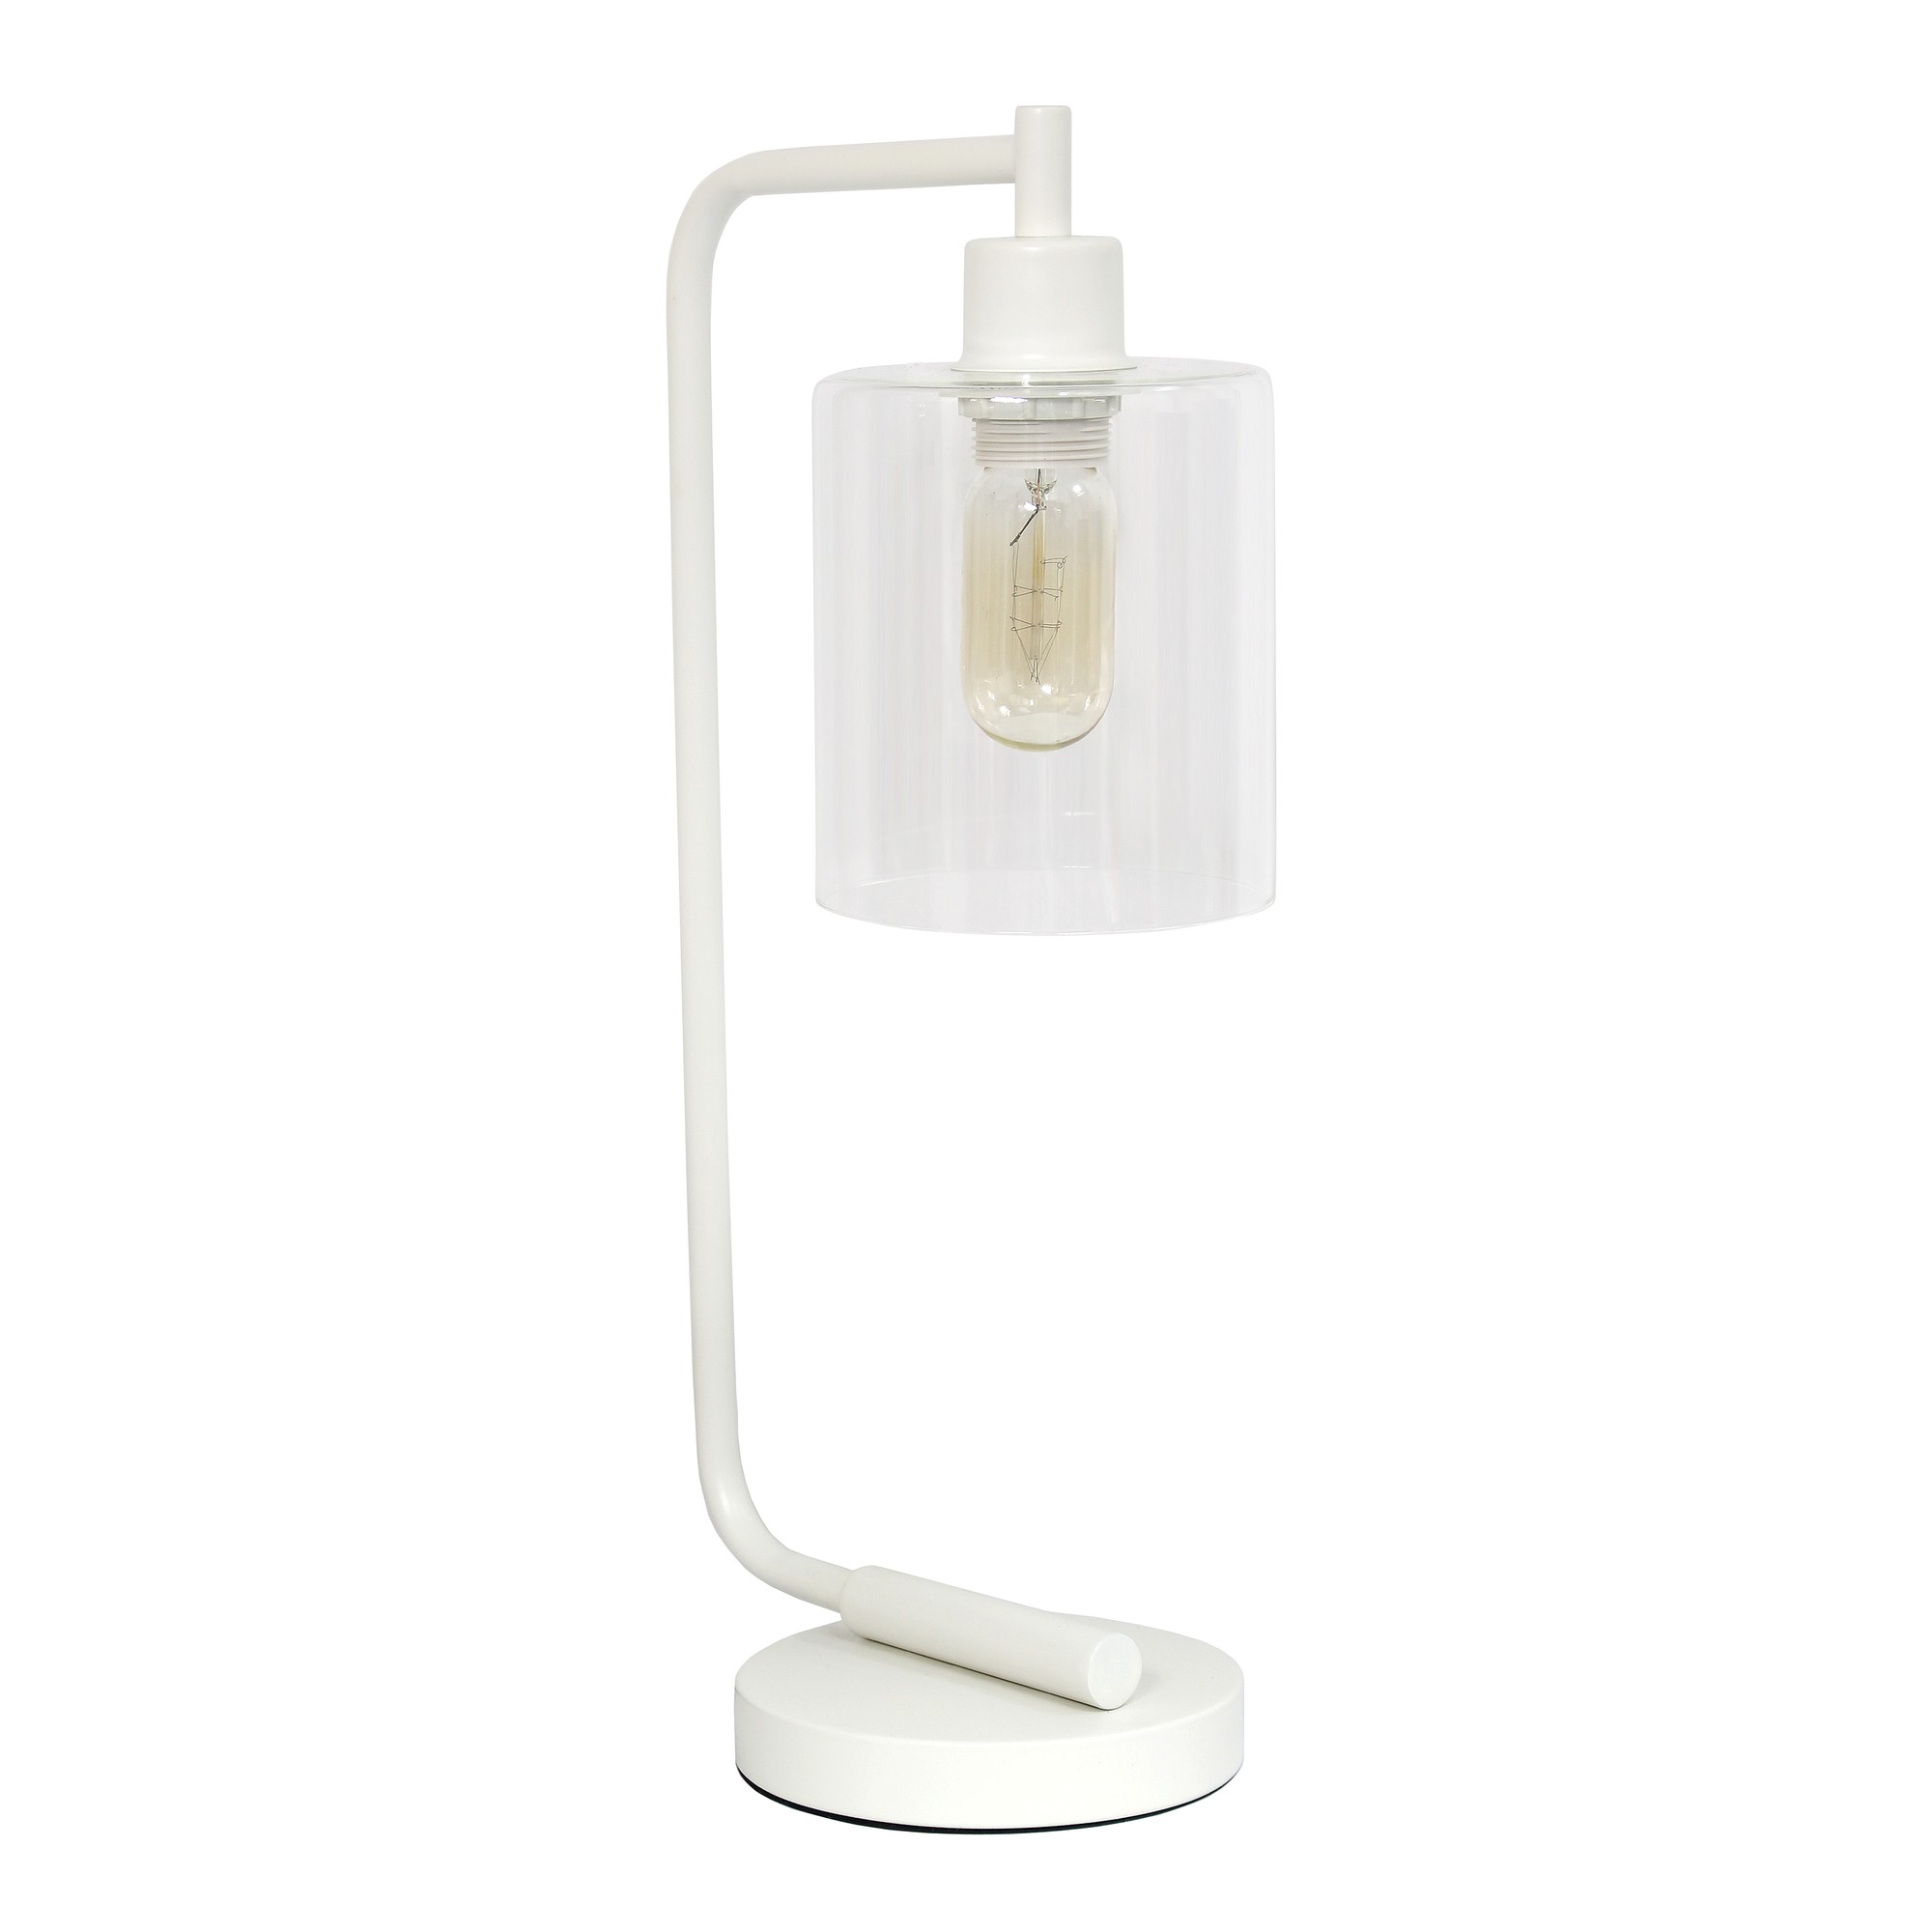 Lalia Home Modern Iron Desk Lamp with Glass Shade, White